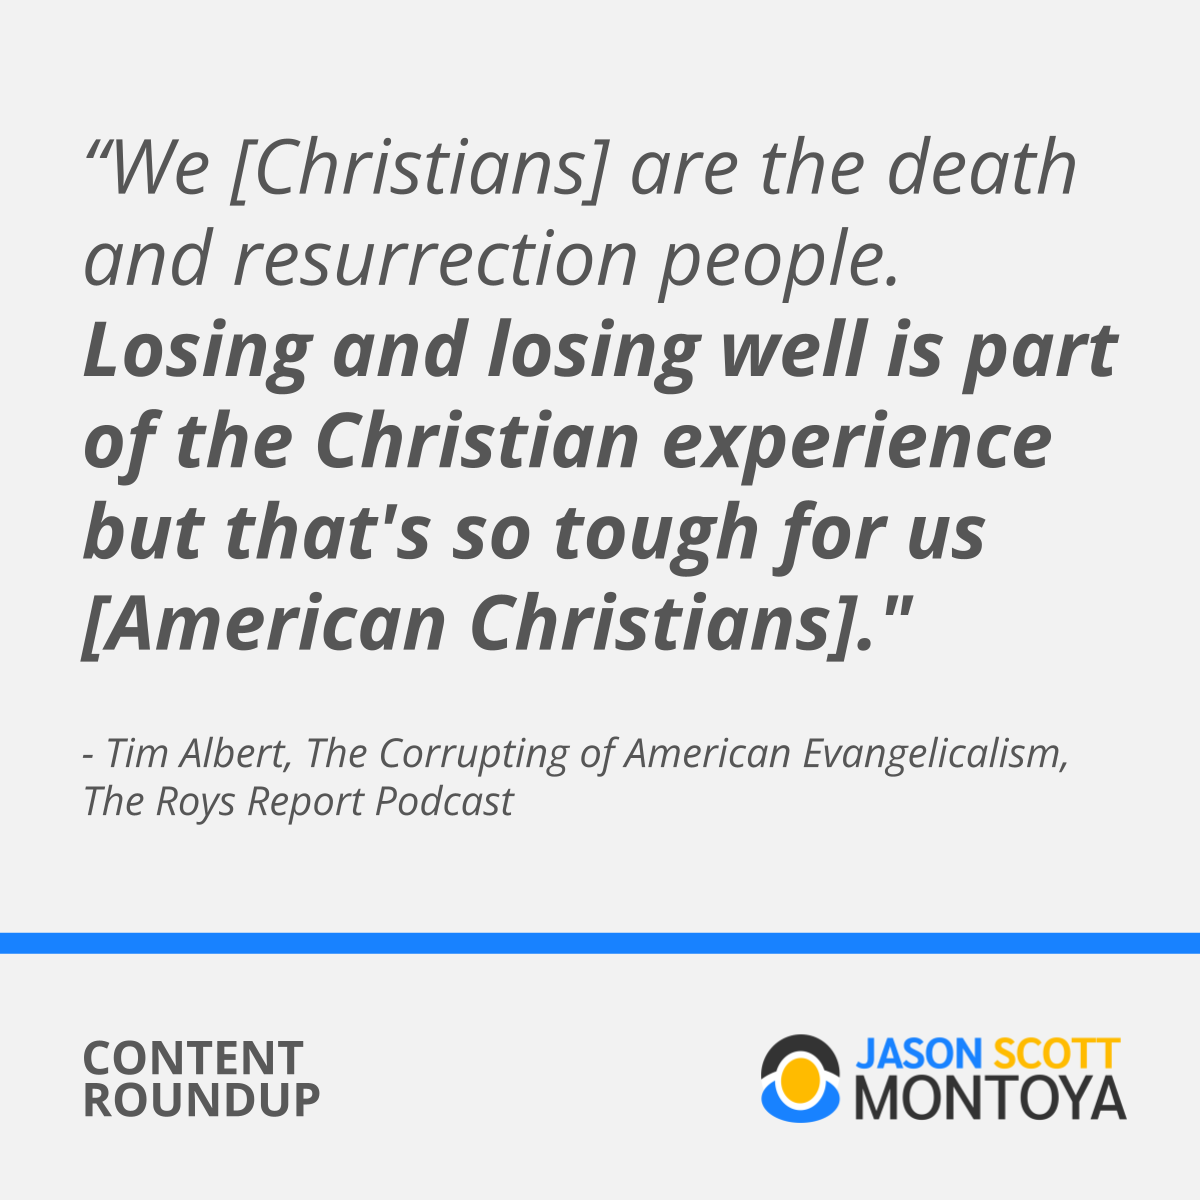 We [Christians] are the death and resurrection people. Losing and losing well is part of the Christian experience but that's so tough for us [American Christians]." - Tim Alberta